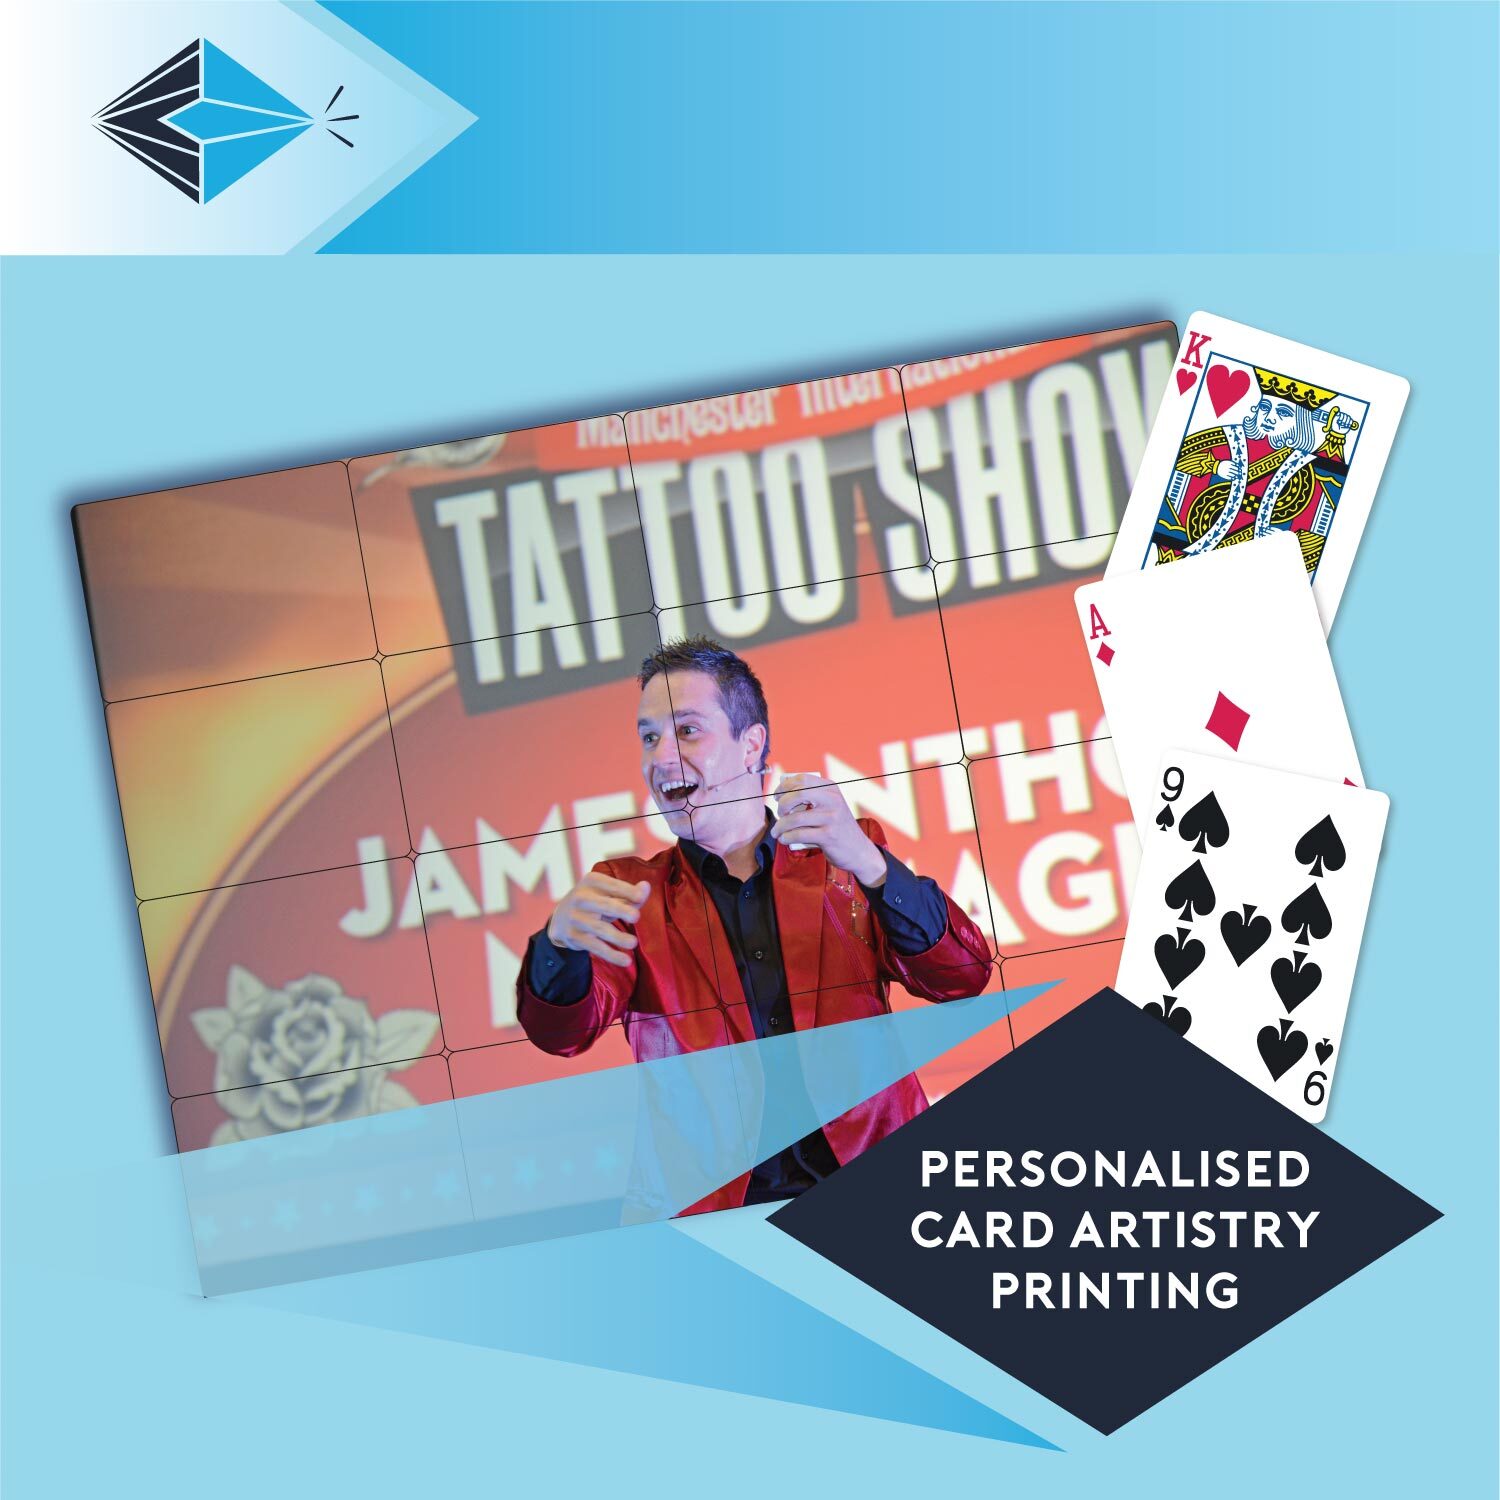 Personalised Card Artistry Printing 16 Bicycle Playing Card Your Image on the front Art for Magicians Magic printing Stockport Manchester UK